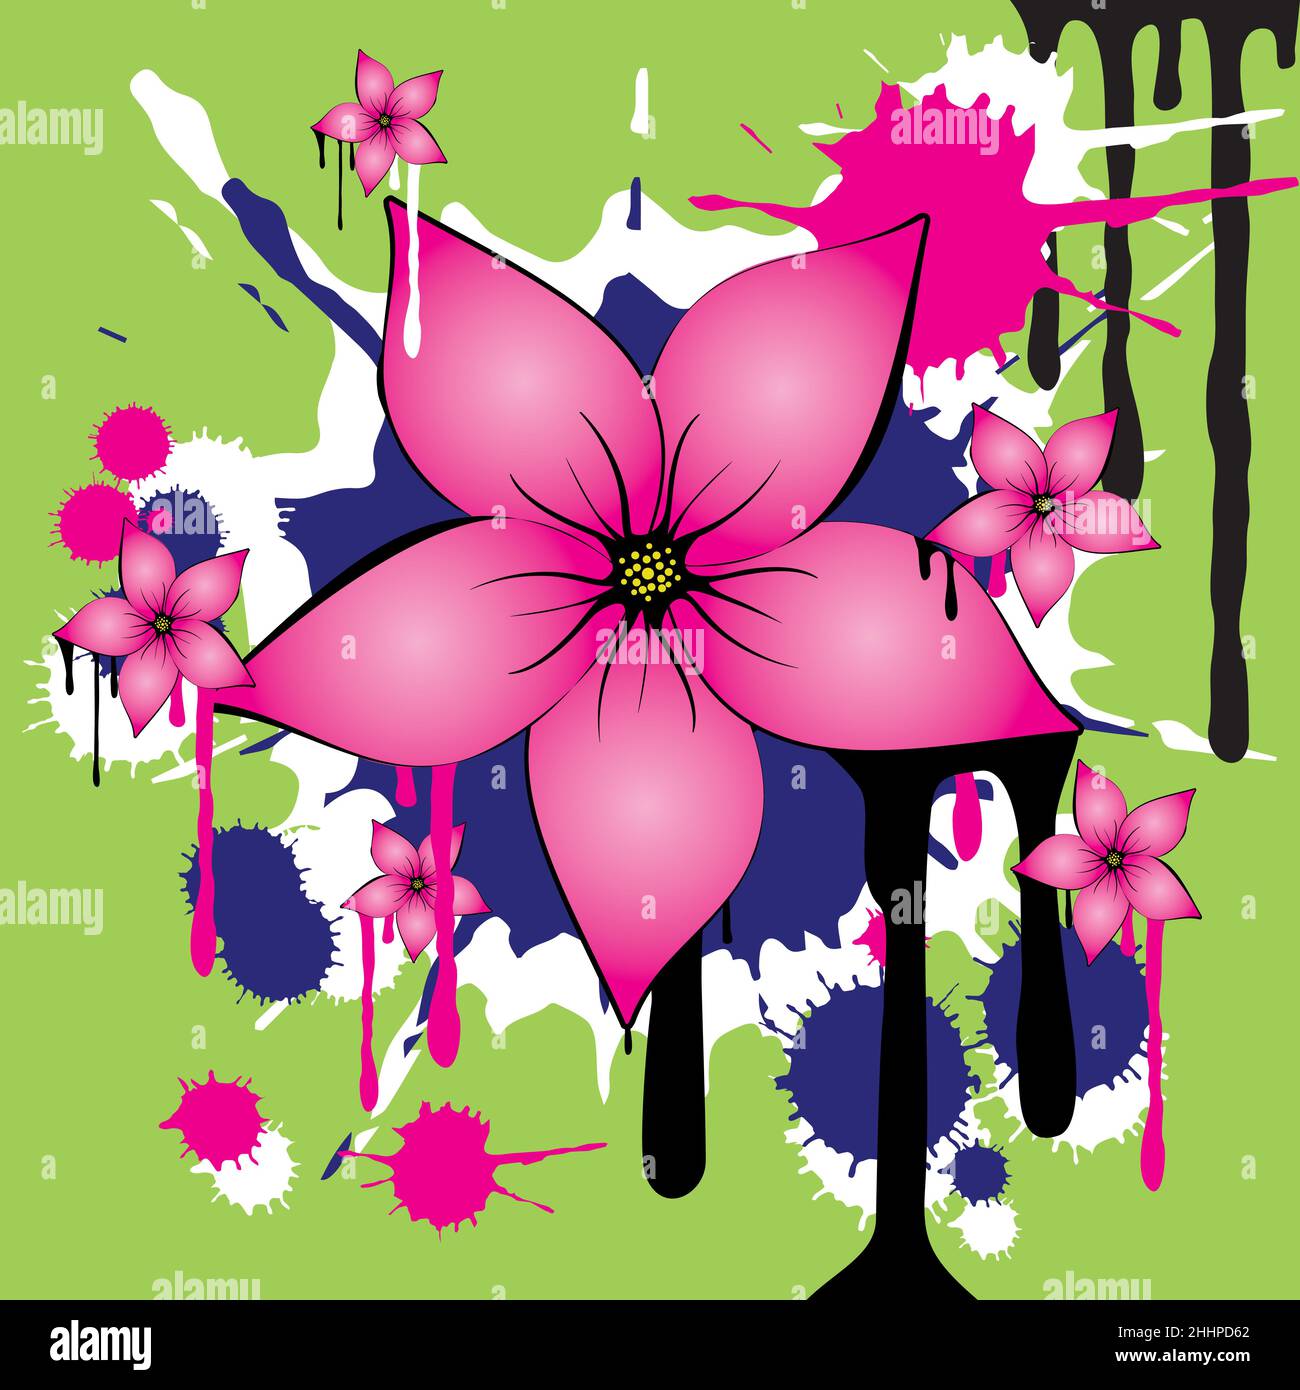 A decorative grunge and flower graffiti art. In the middle is a big pink flower with five petals. In the back are drippings and ink spots. Stock Vector